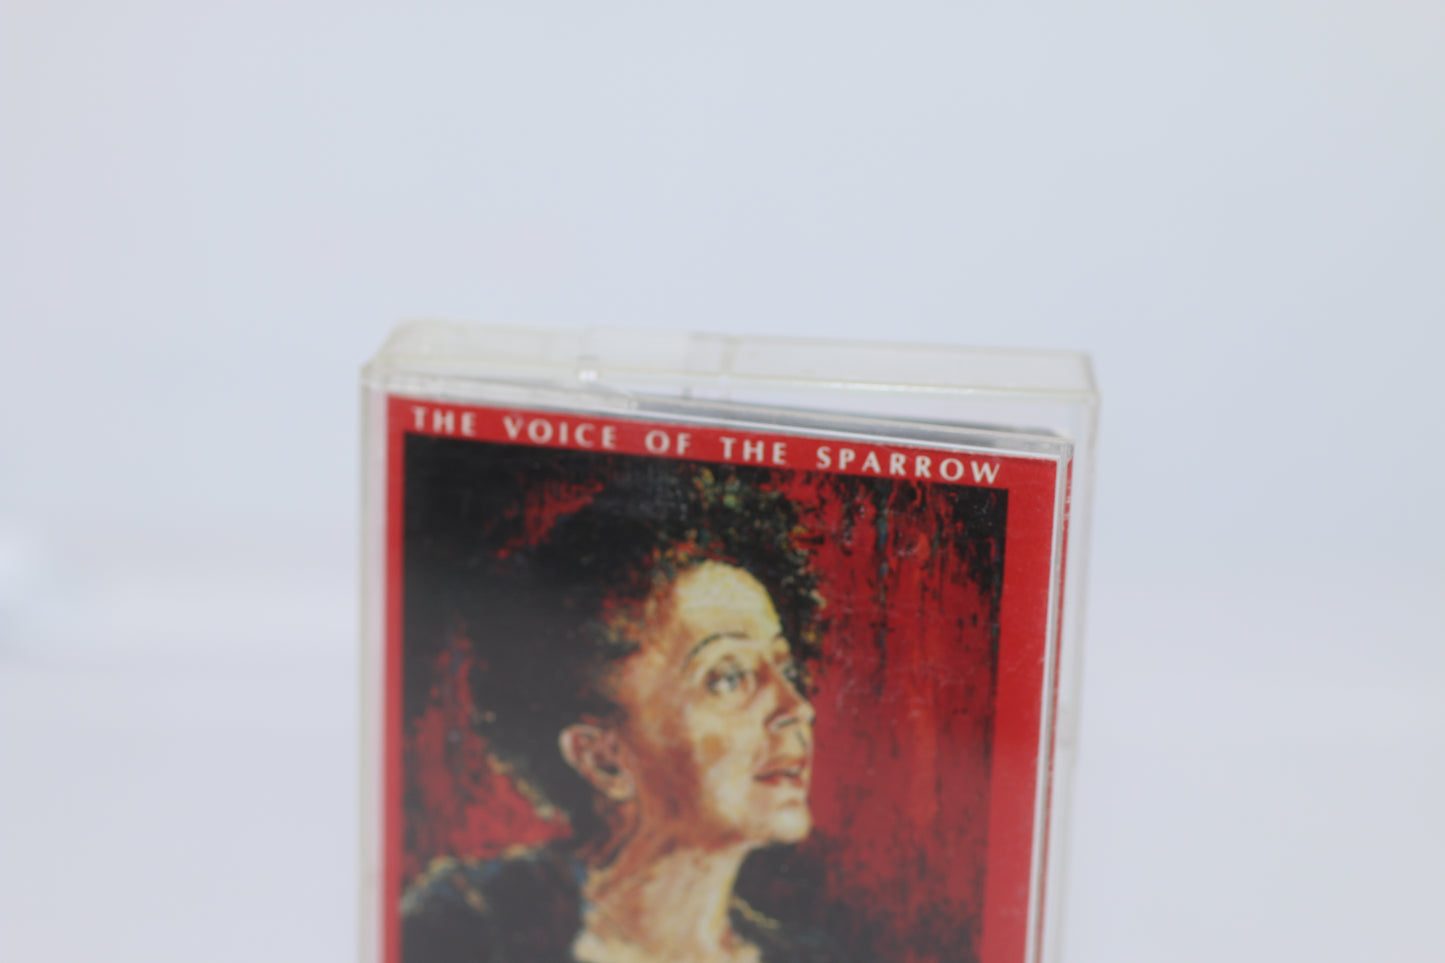 VTG Edith Piaf Voice of the Sparrow Very Best of Edith Piaf Cassette Tape, Capitol